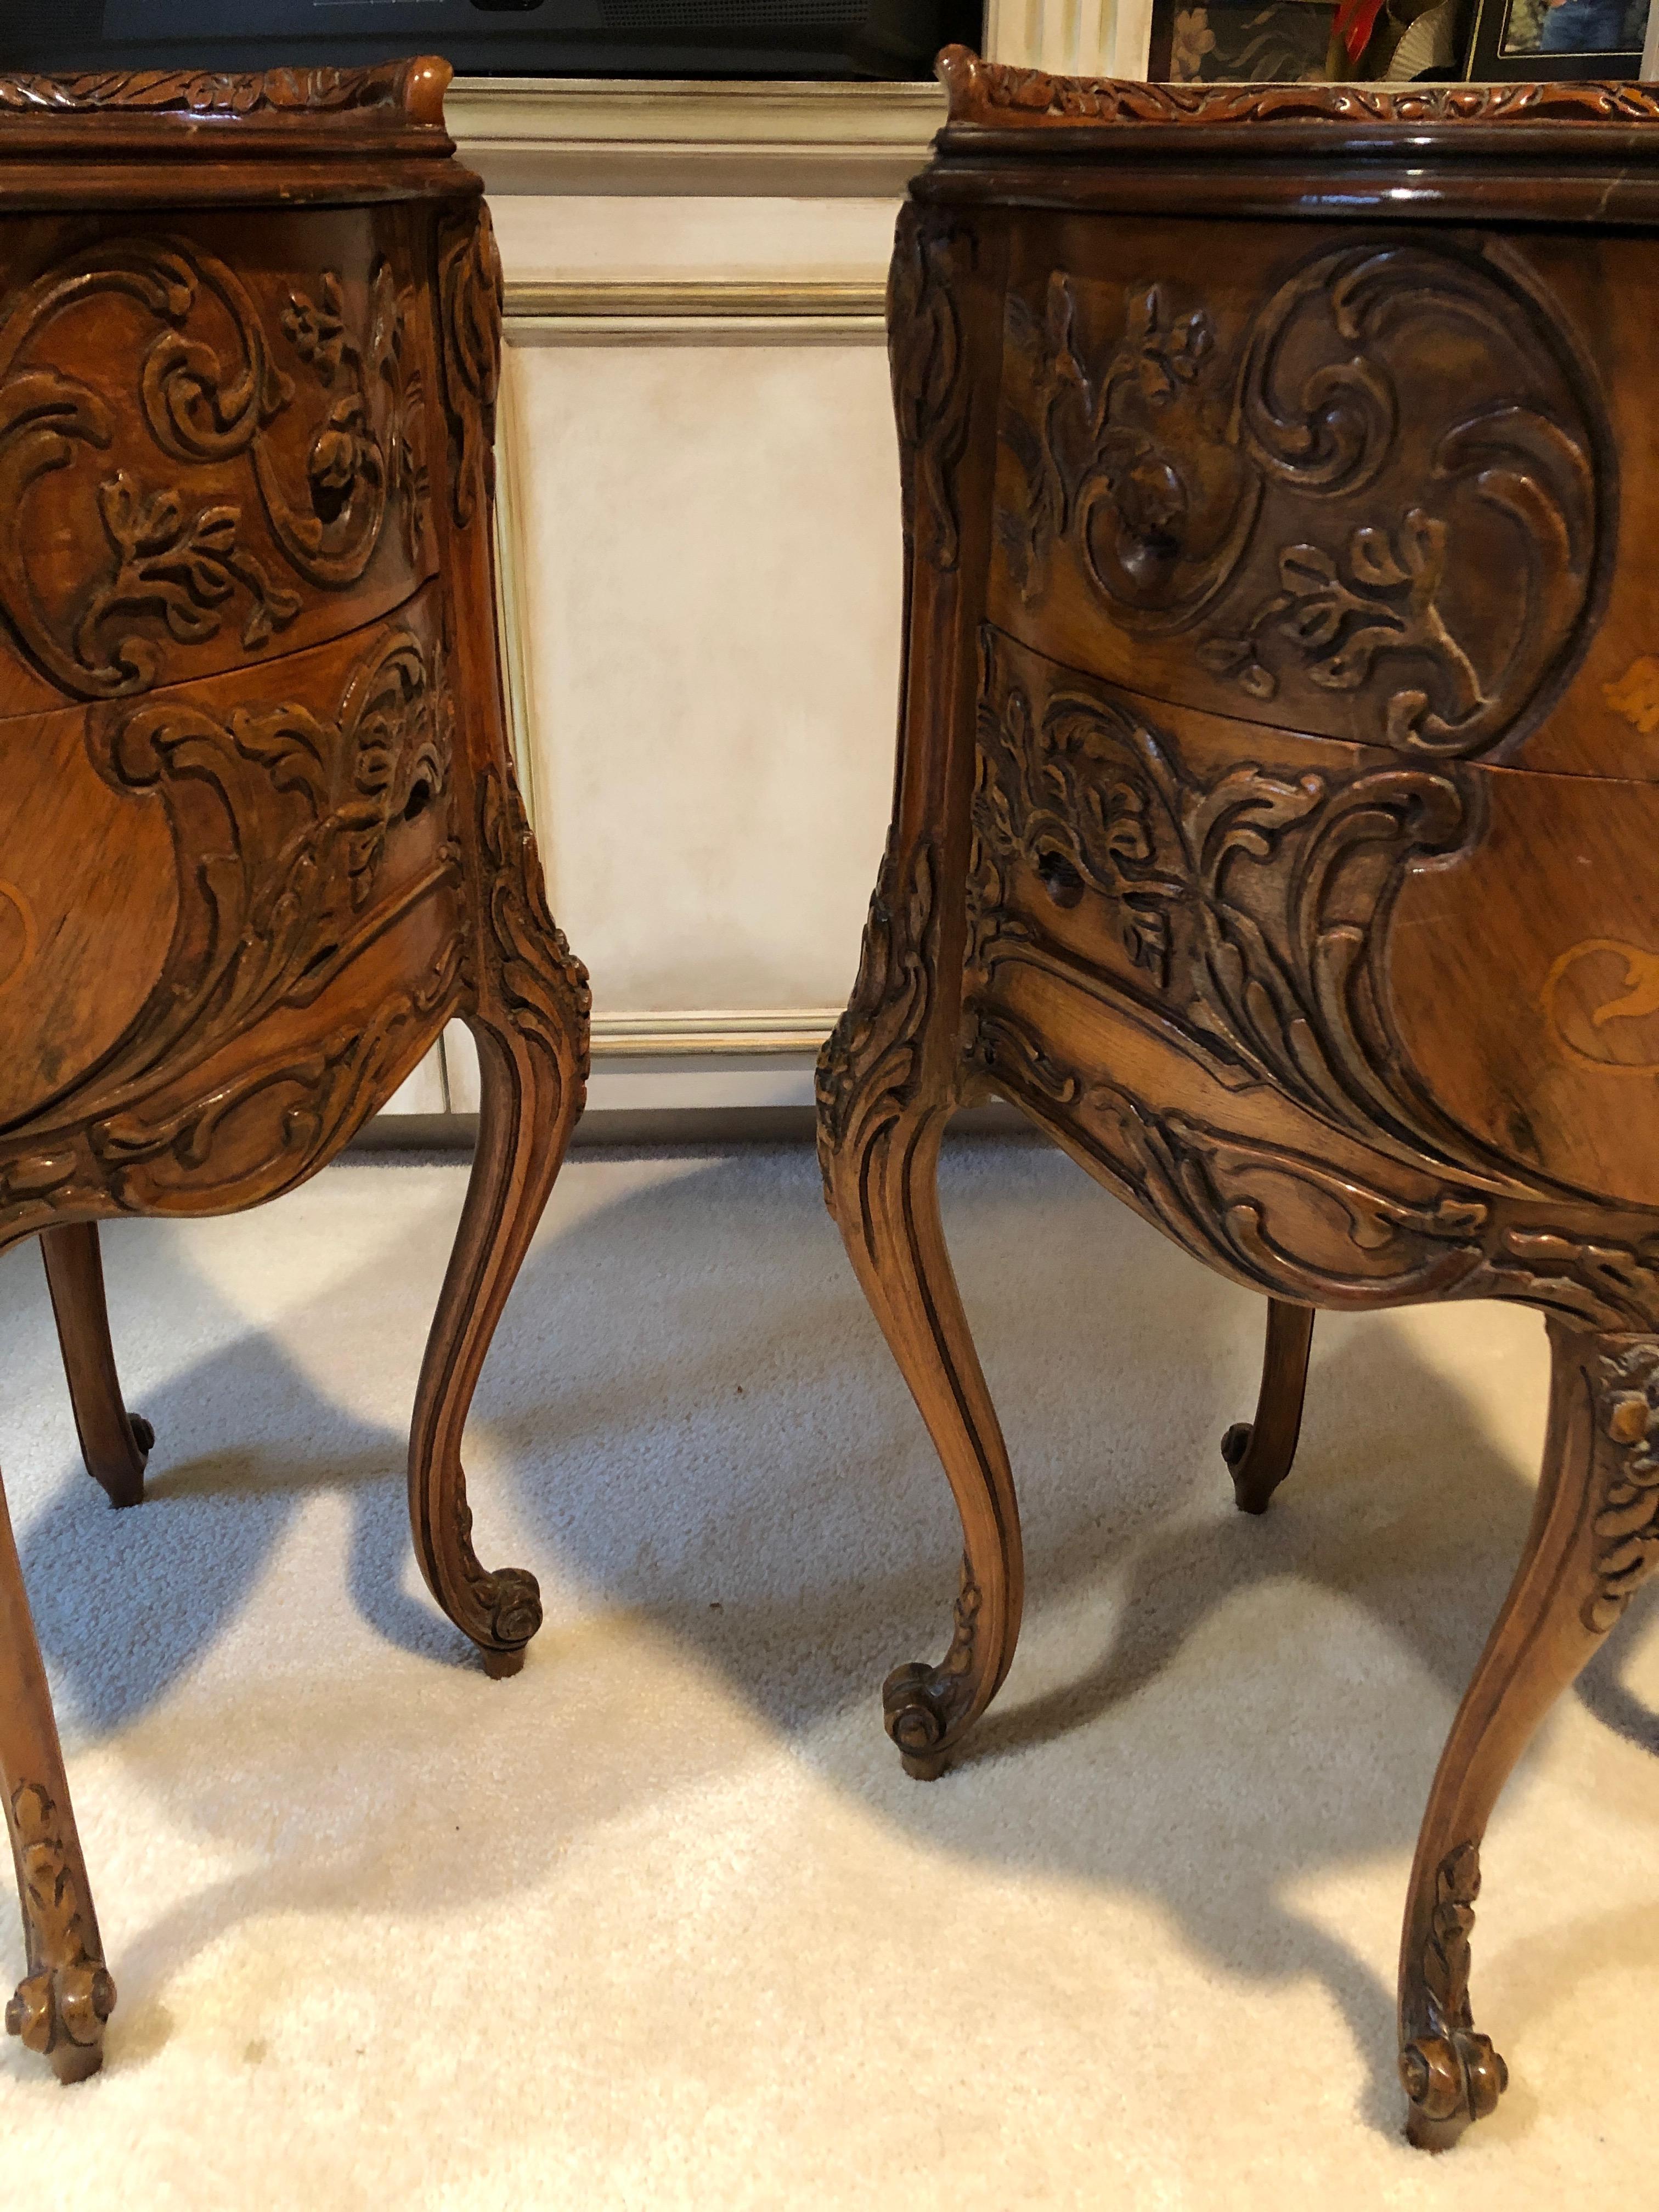 20th Century Pair of Louis XV Round Marquetry Inlaid Carved Mahogany Side Tables Nightstands